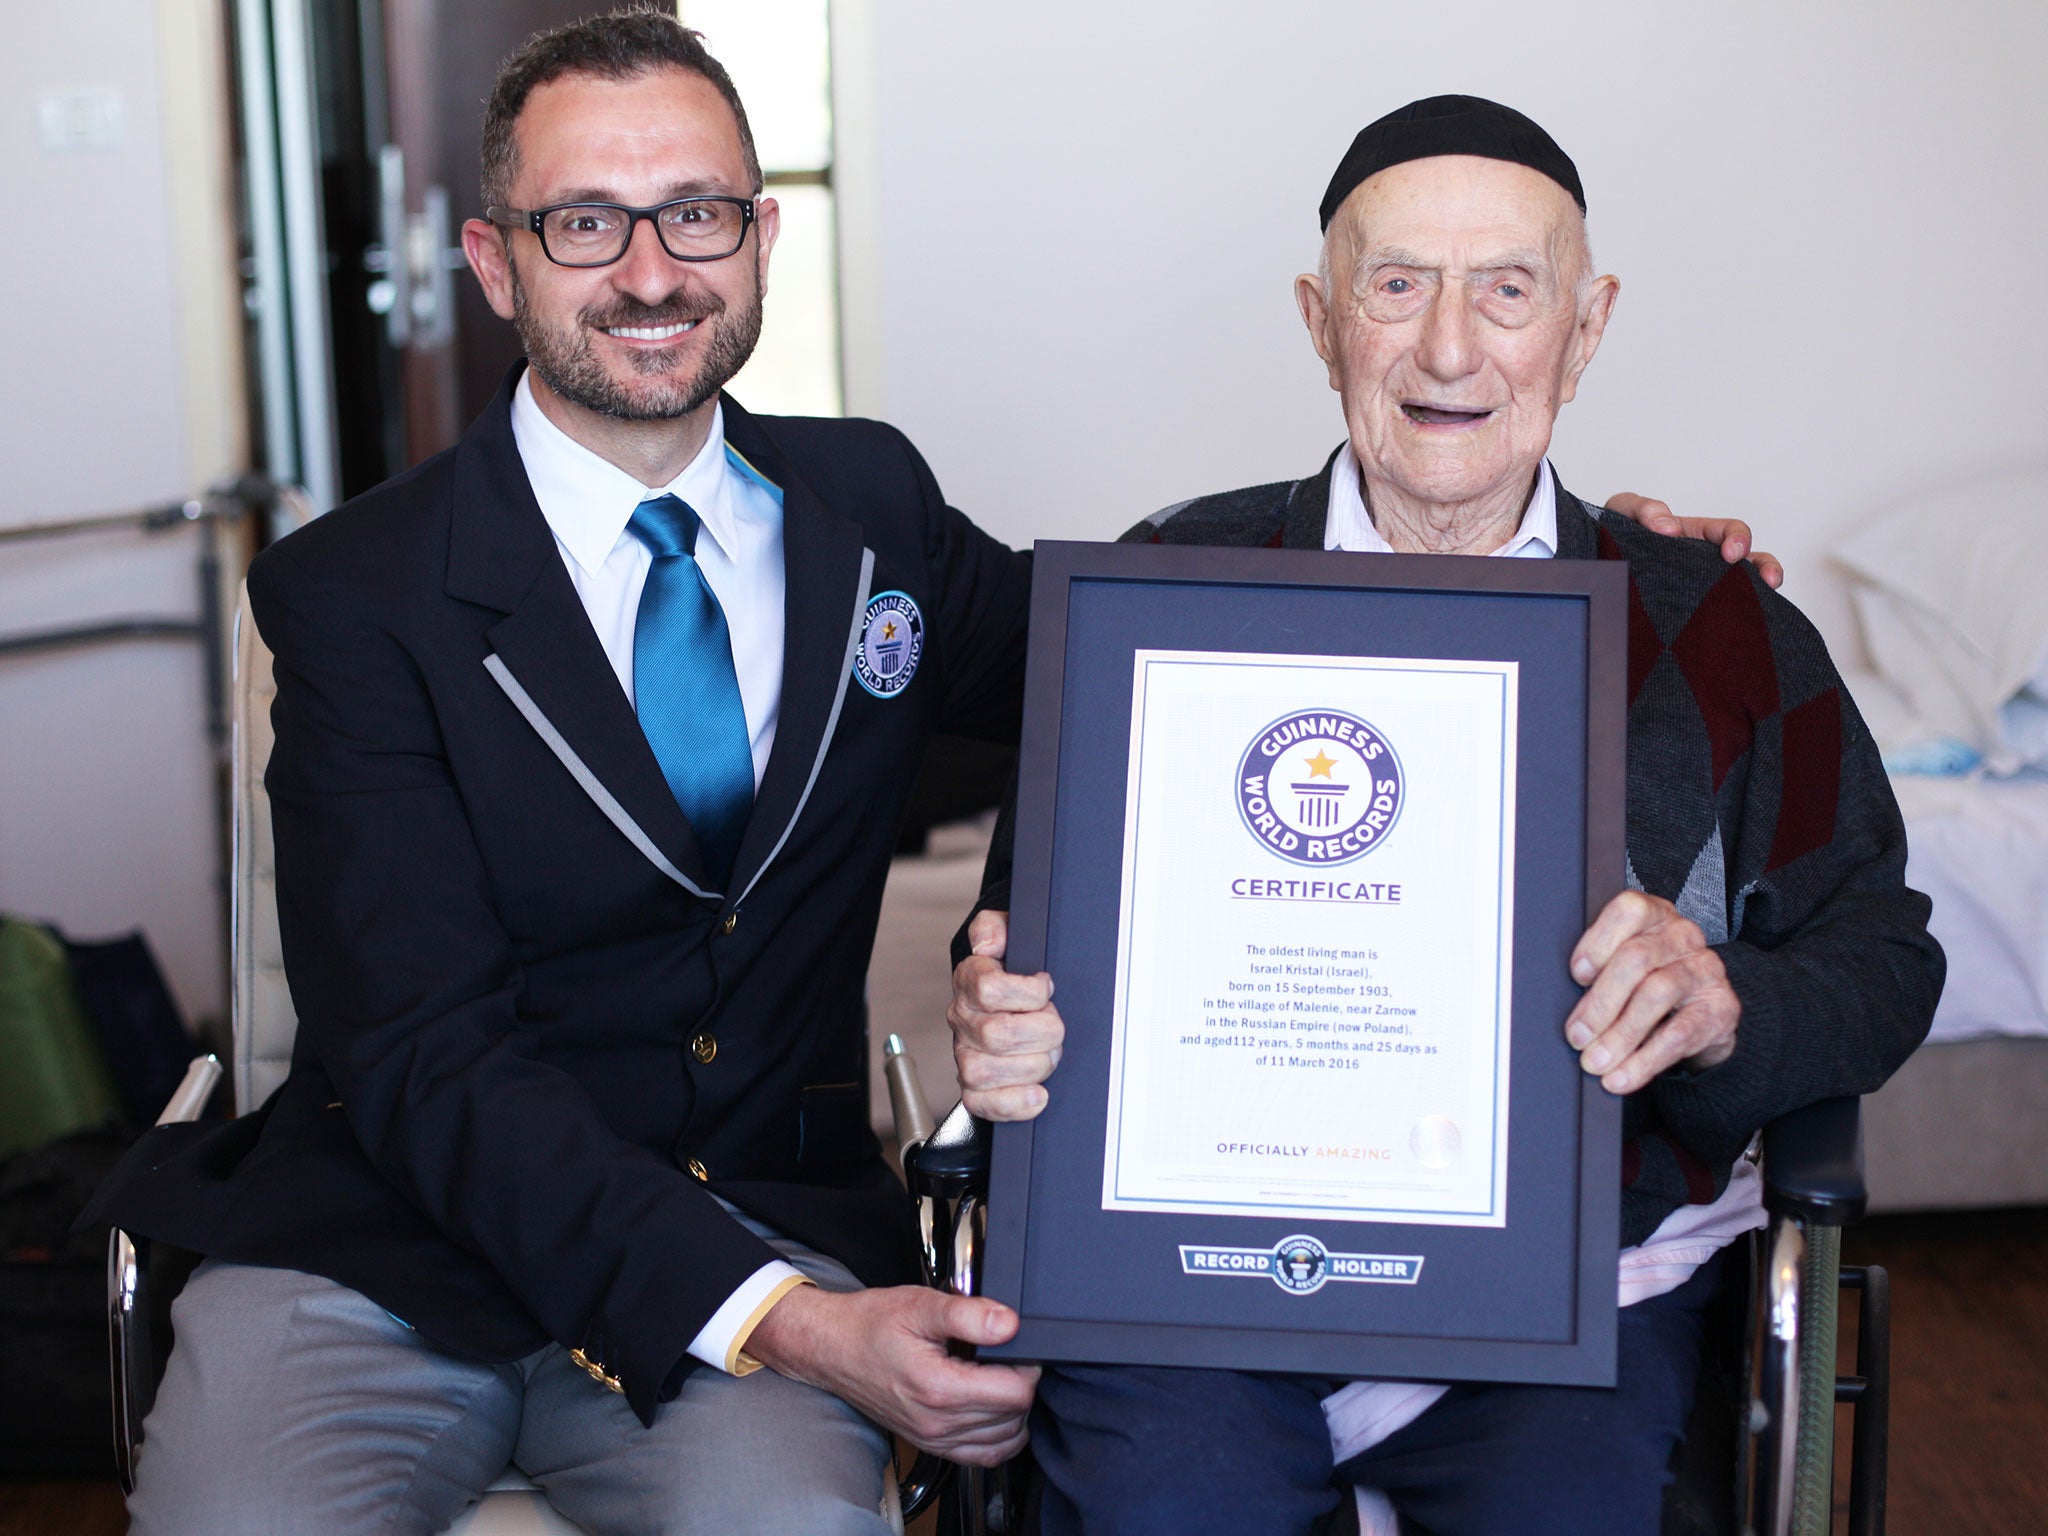 Israel Kristal, 113, receives his certificate from Marco Frigatti, Guinness World Records Head of Records, in March 2016